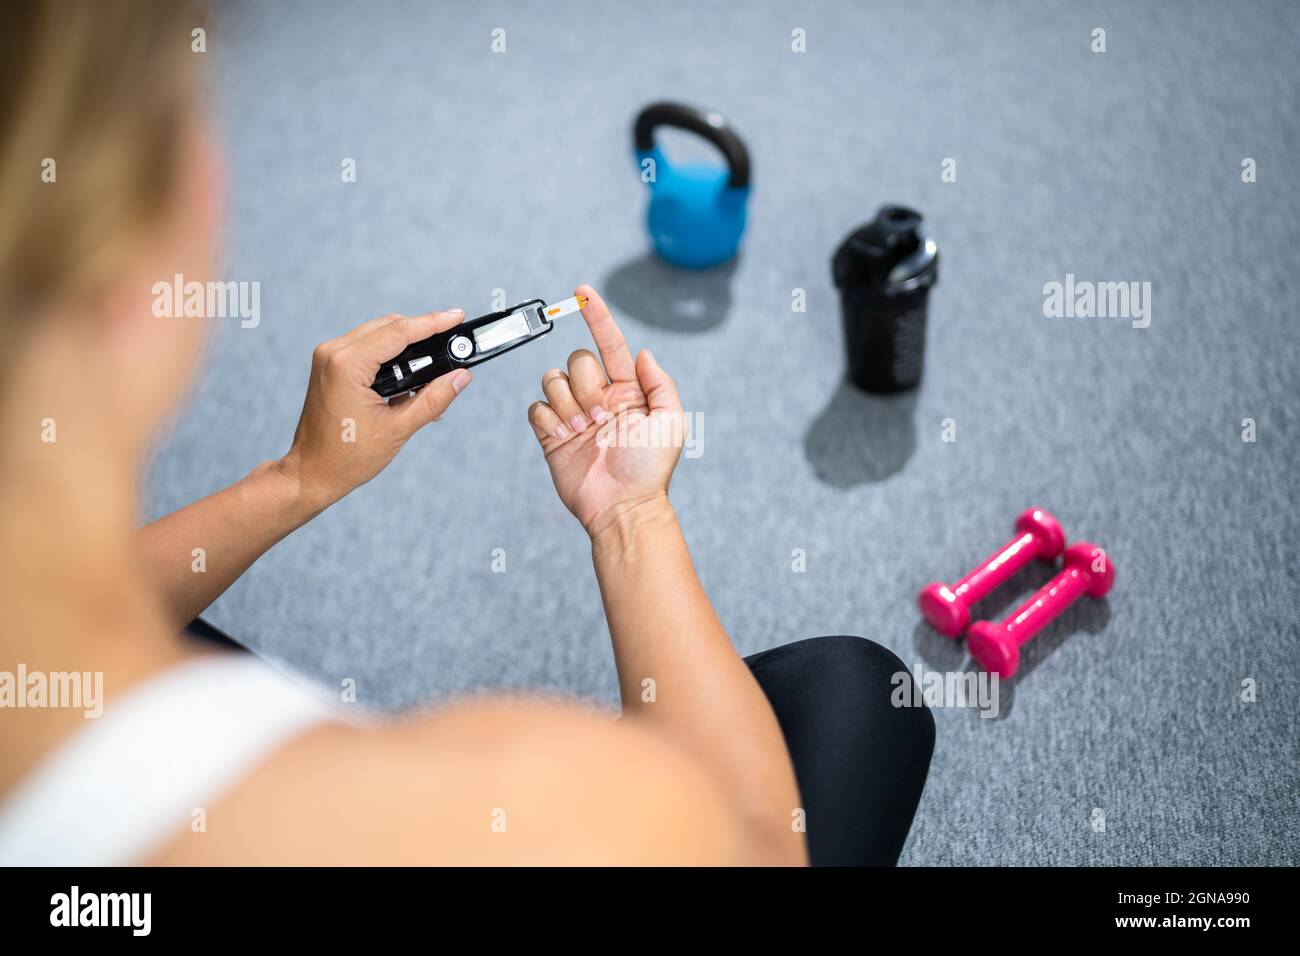 Diabetes And Sport. Healthy Lifestyle And Glucometer Stock Photo